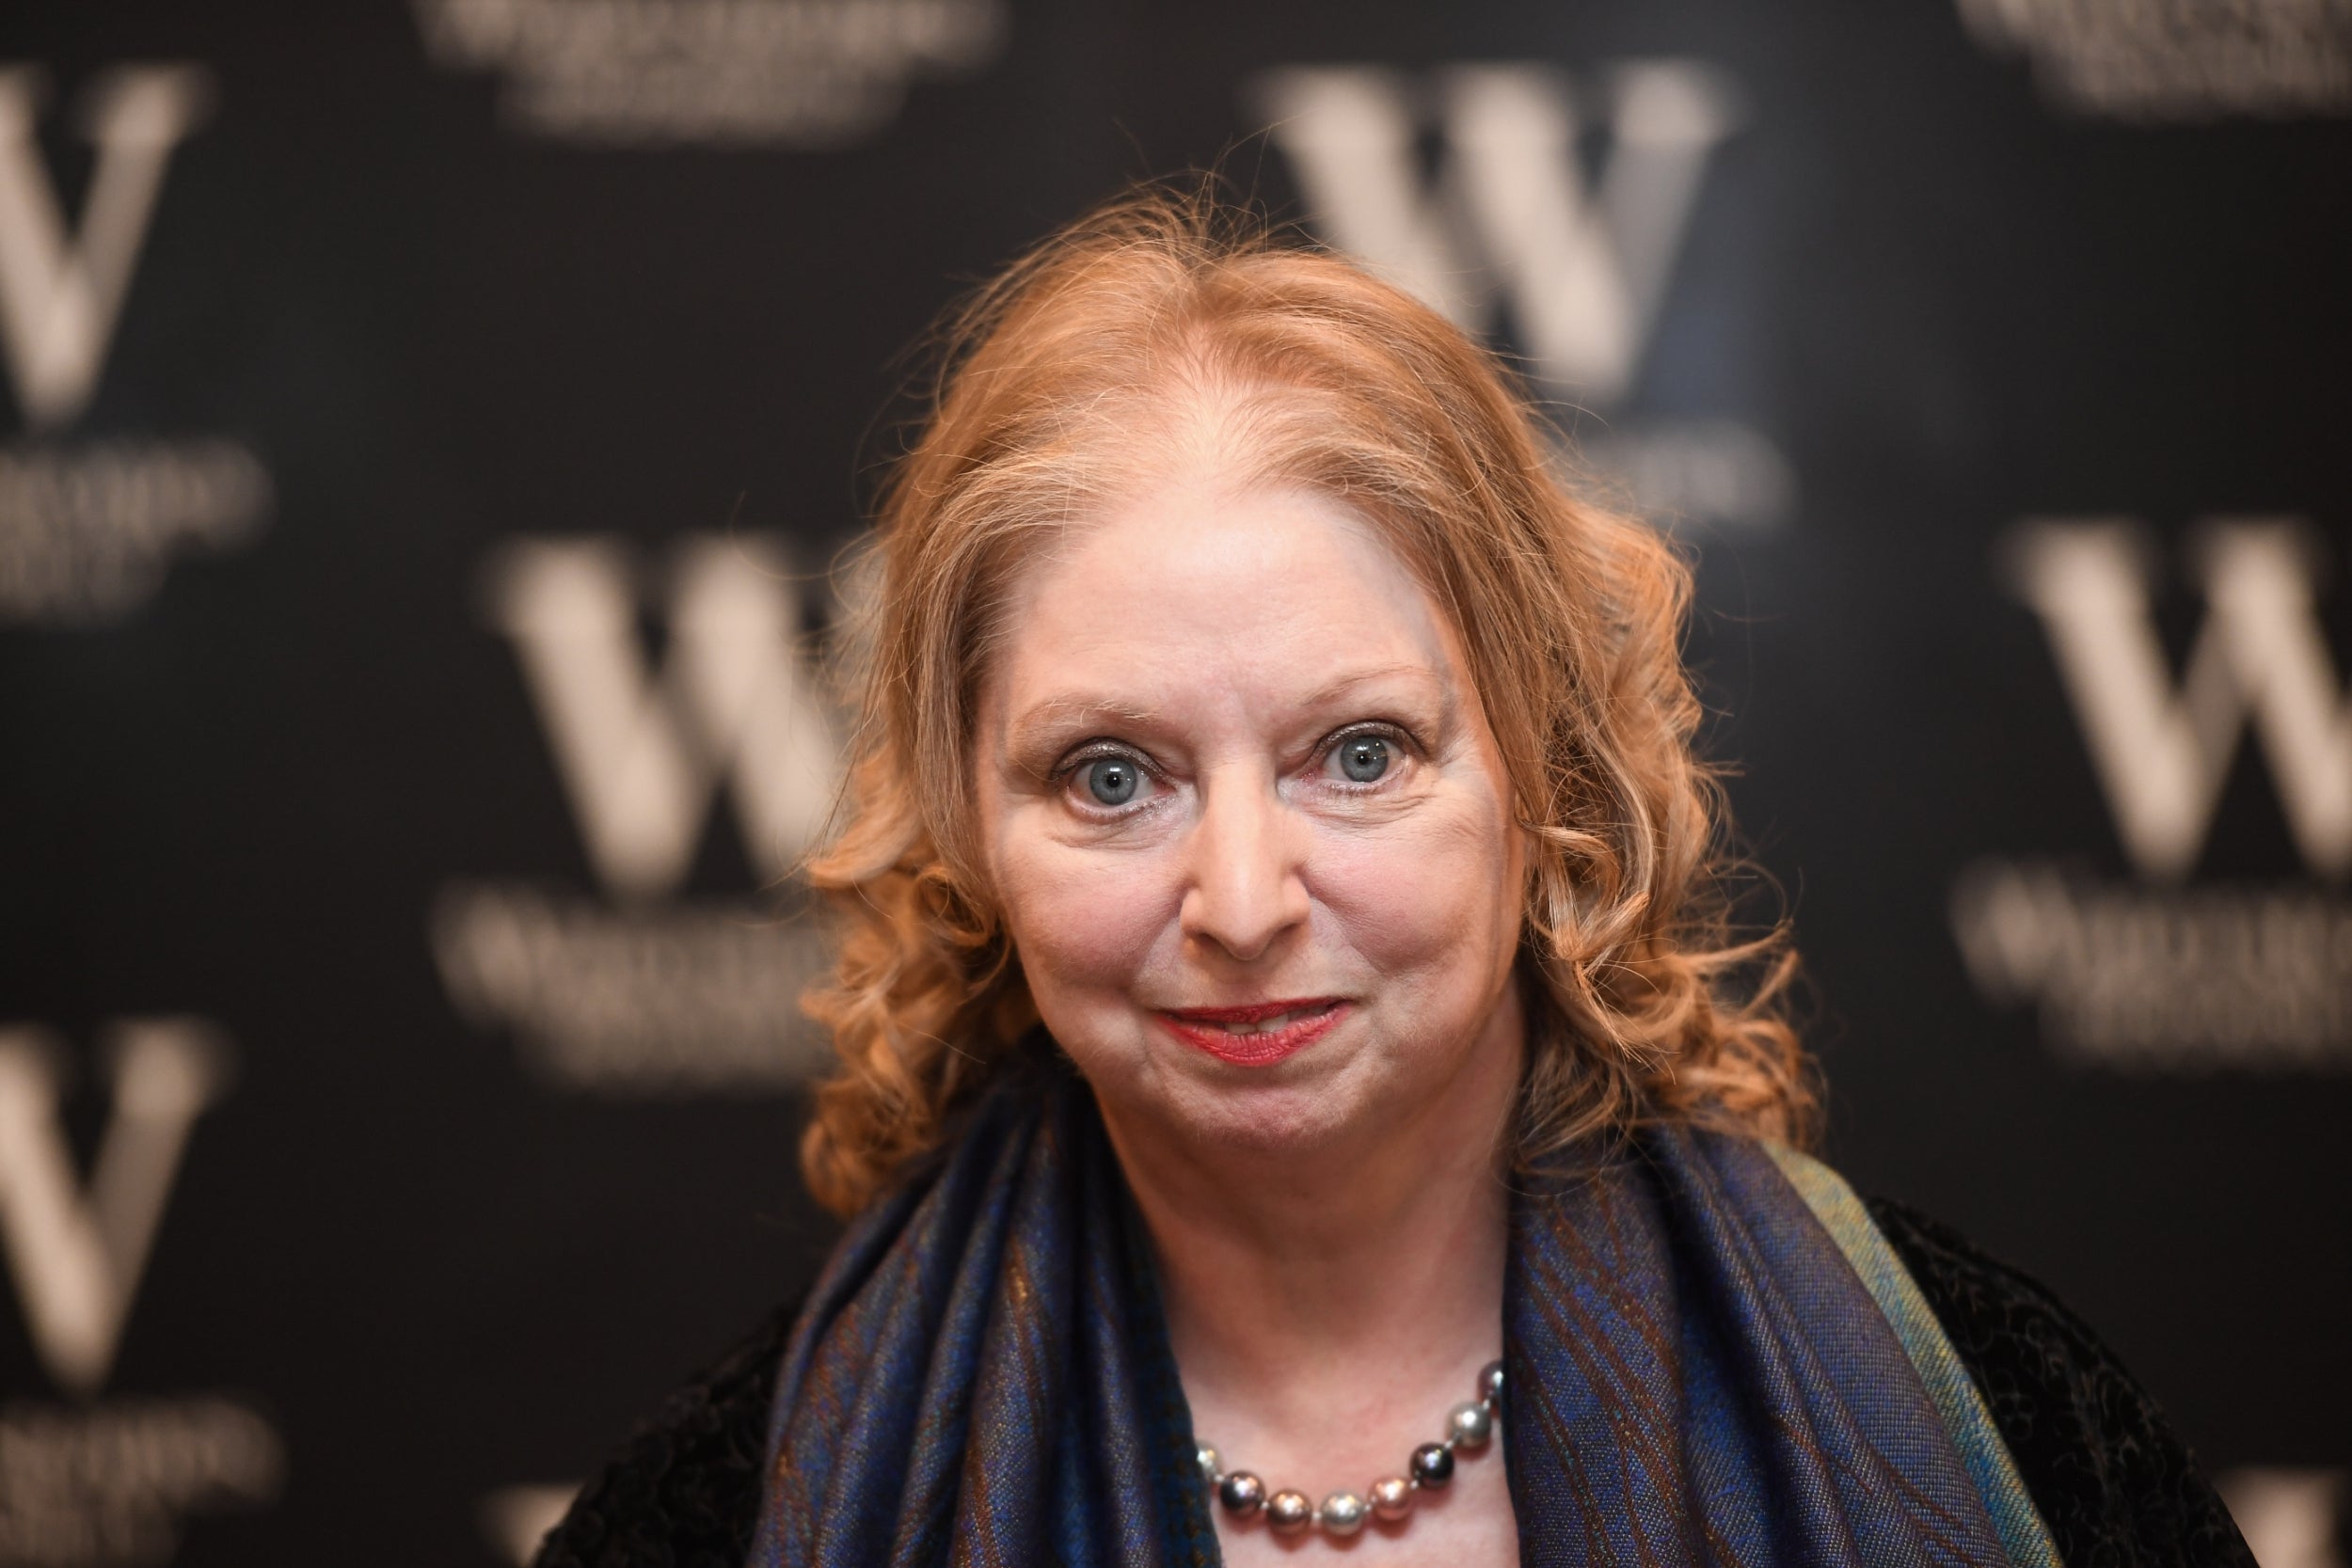 Hilary Mantel has written extensively about the subject of endometriosis